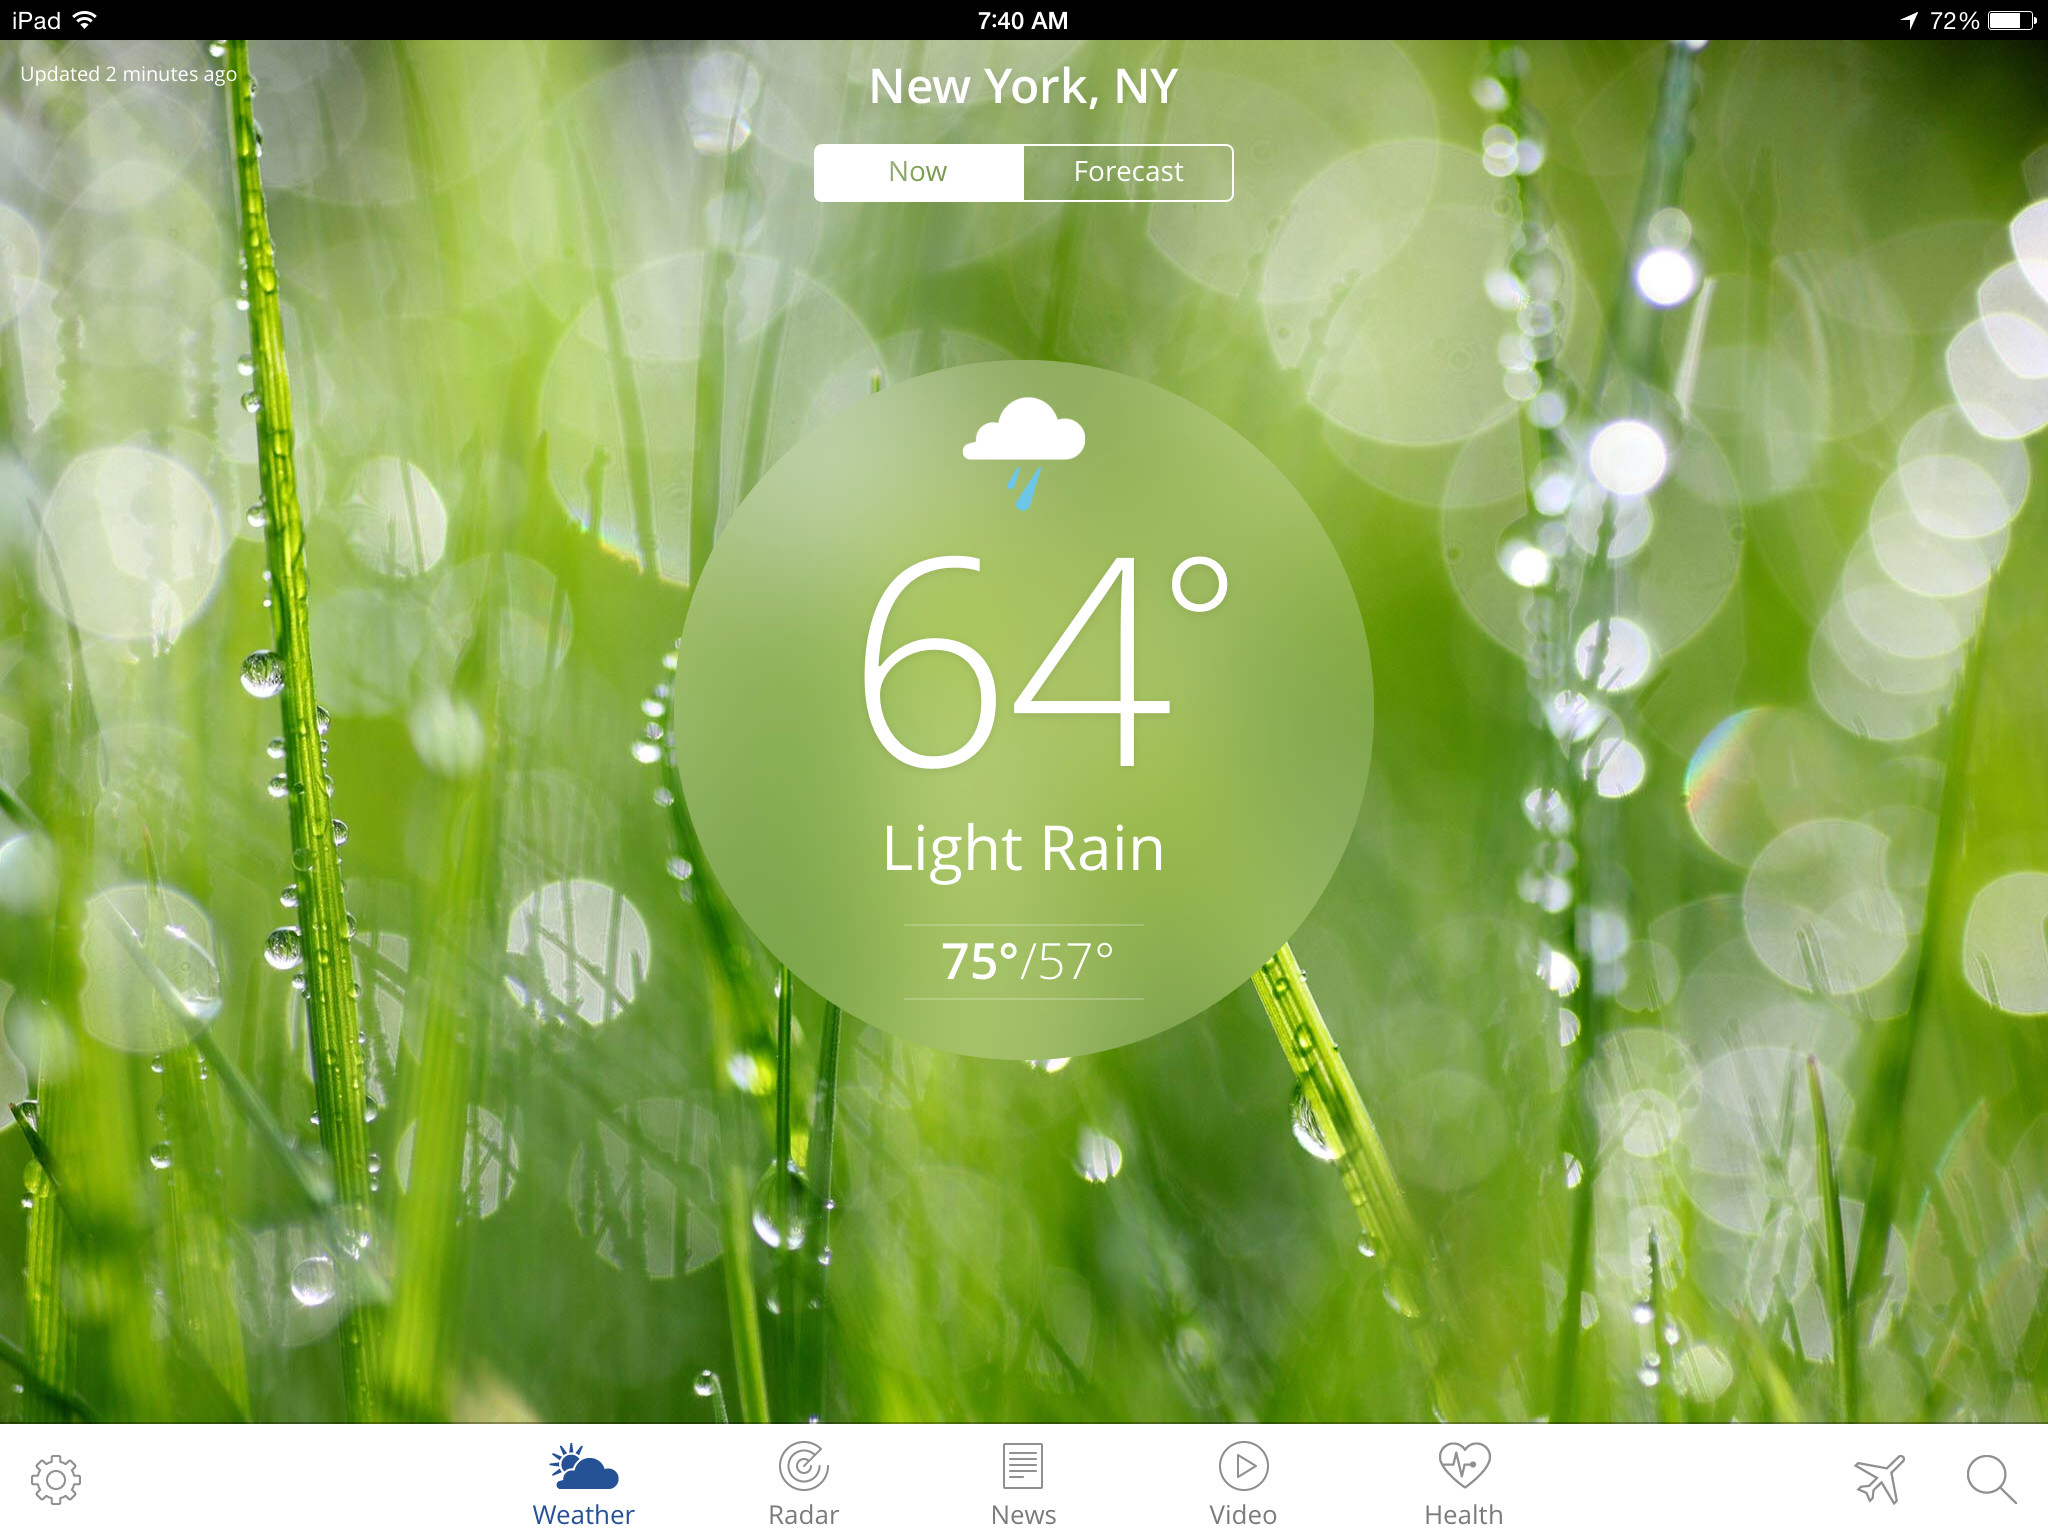 2048x1536 The Weather Channel App for iPad 